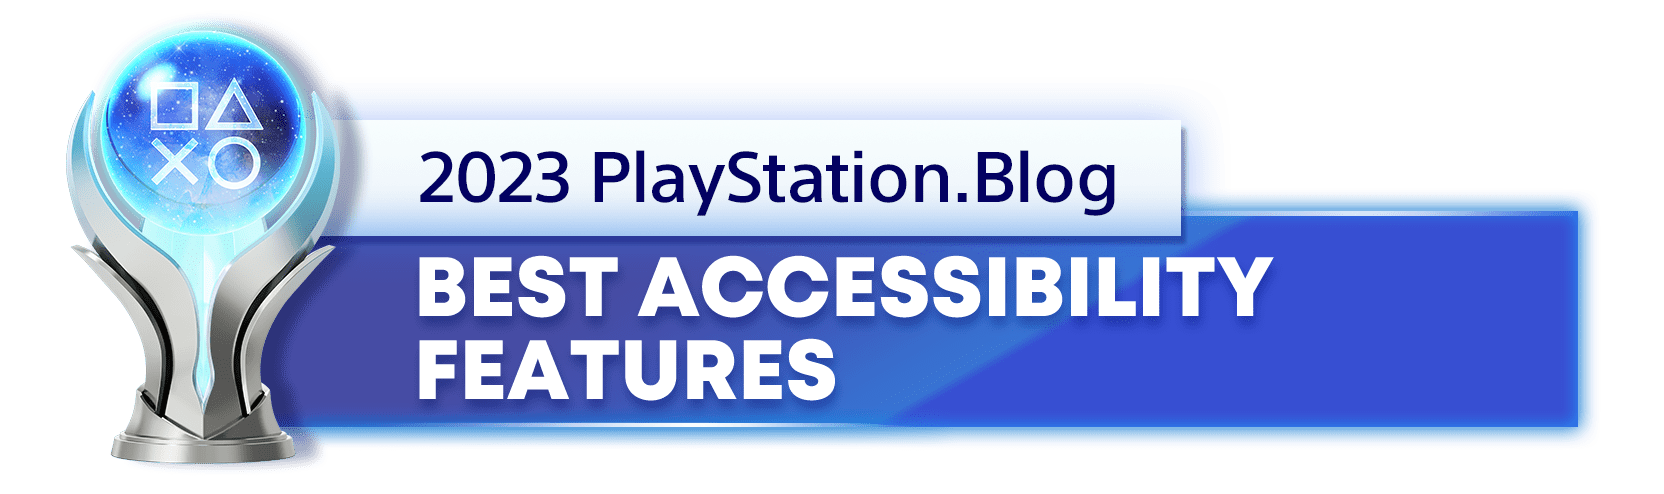 Platinum Trophy for the 2023 PlayStation Blog Best Accessibility Features Winner